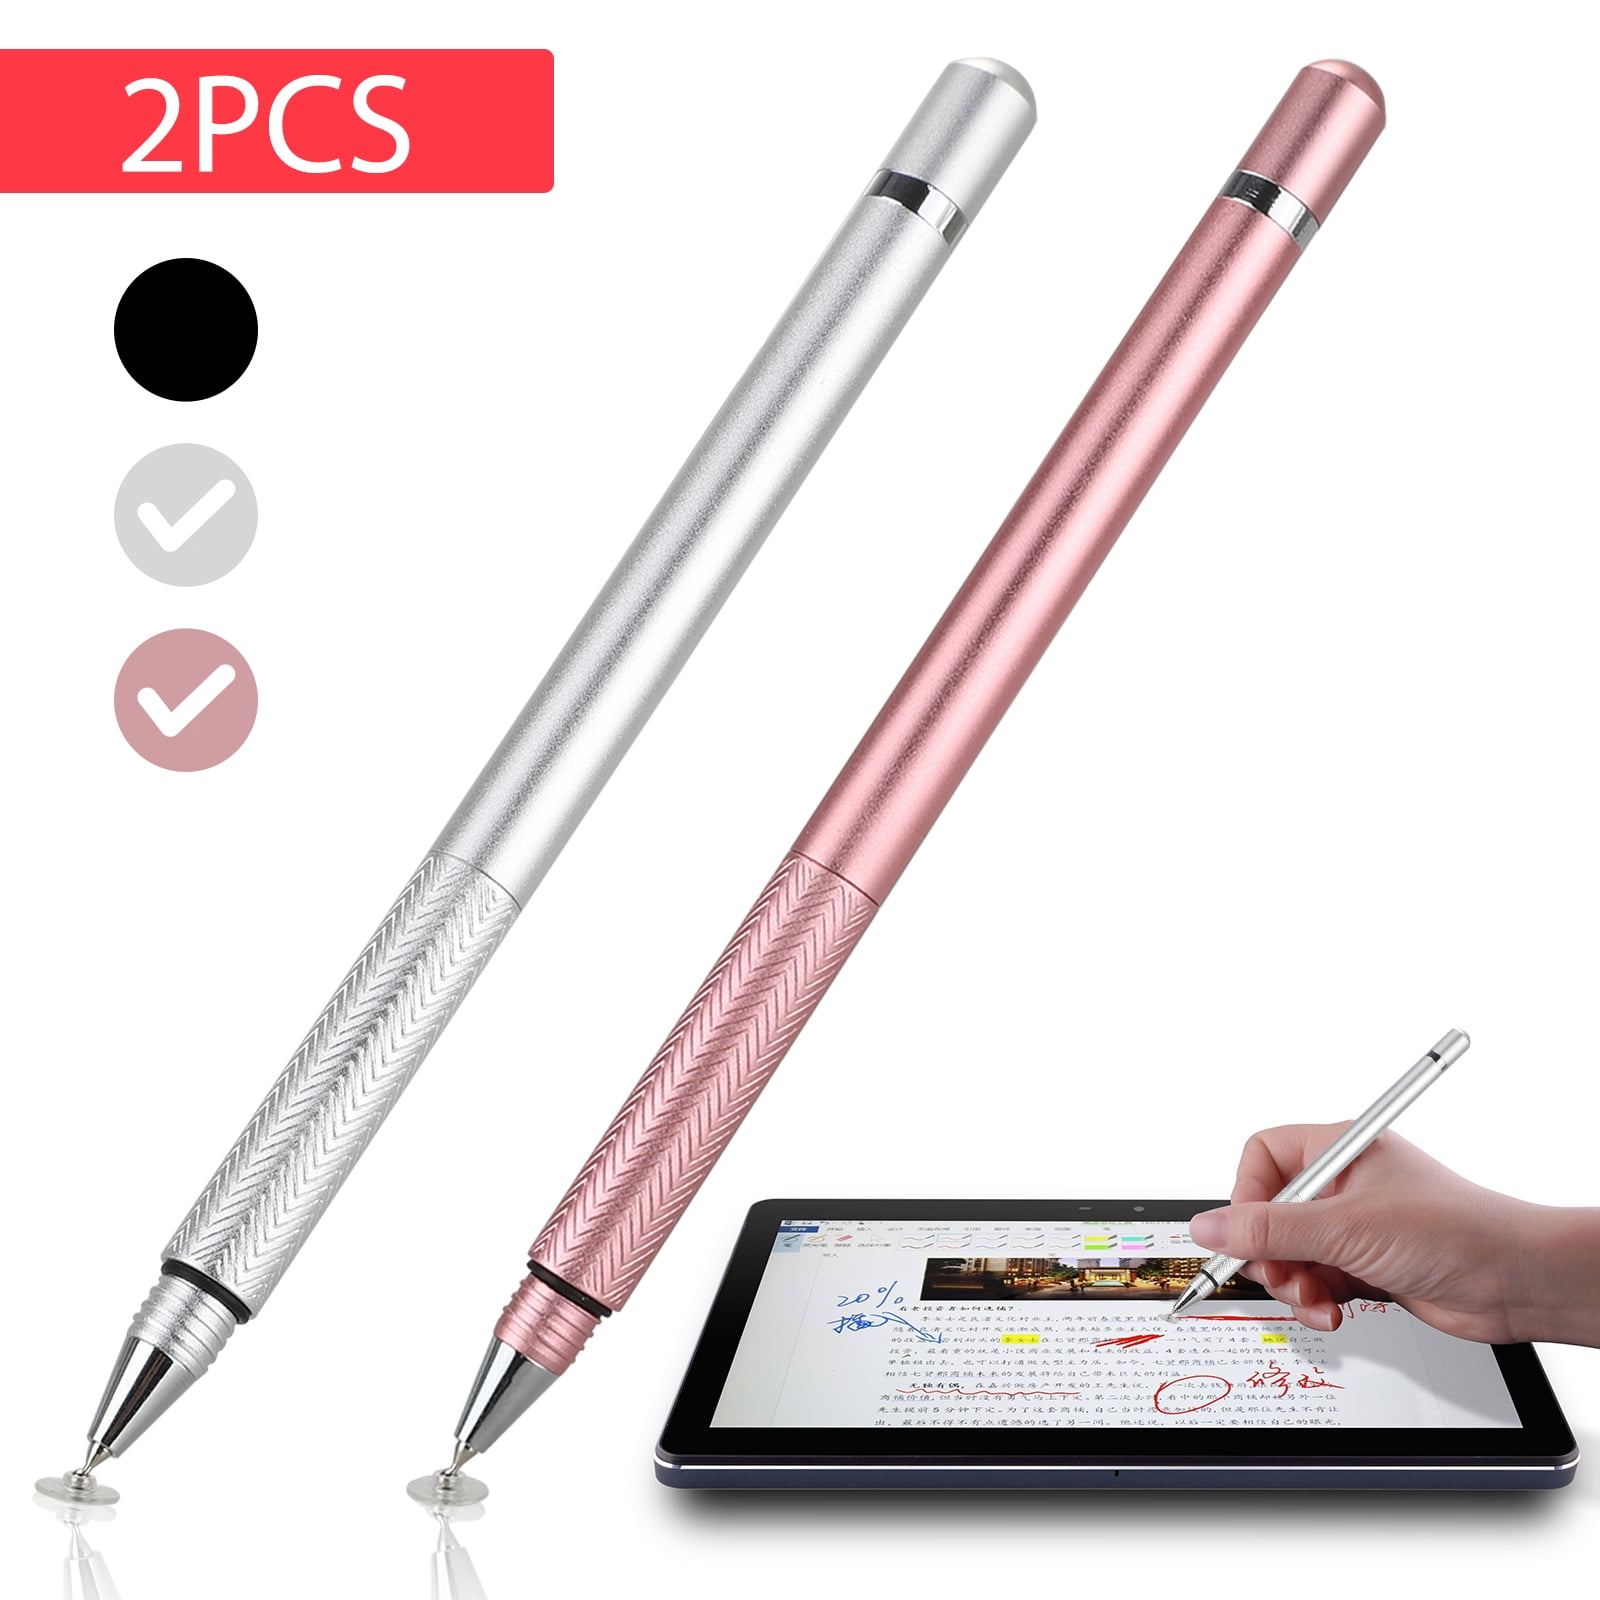 Precision Fine Thin Point Capacitive Pen Touch Screen Stylus Pen For iPhone iPad 